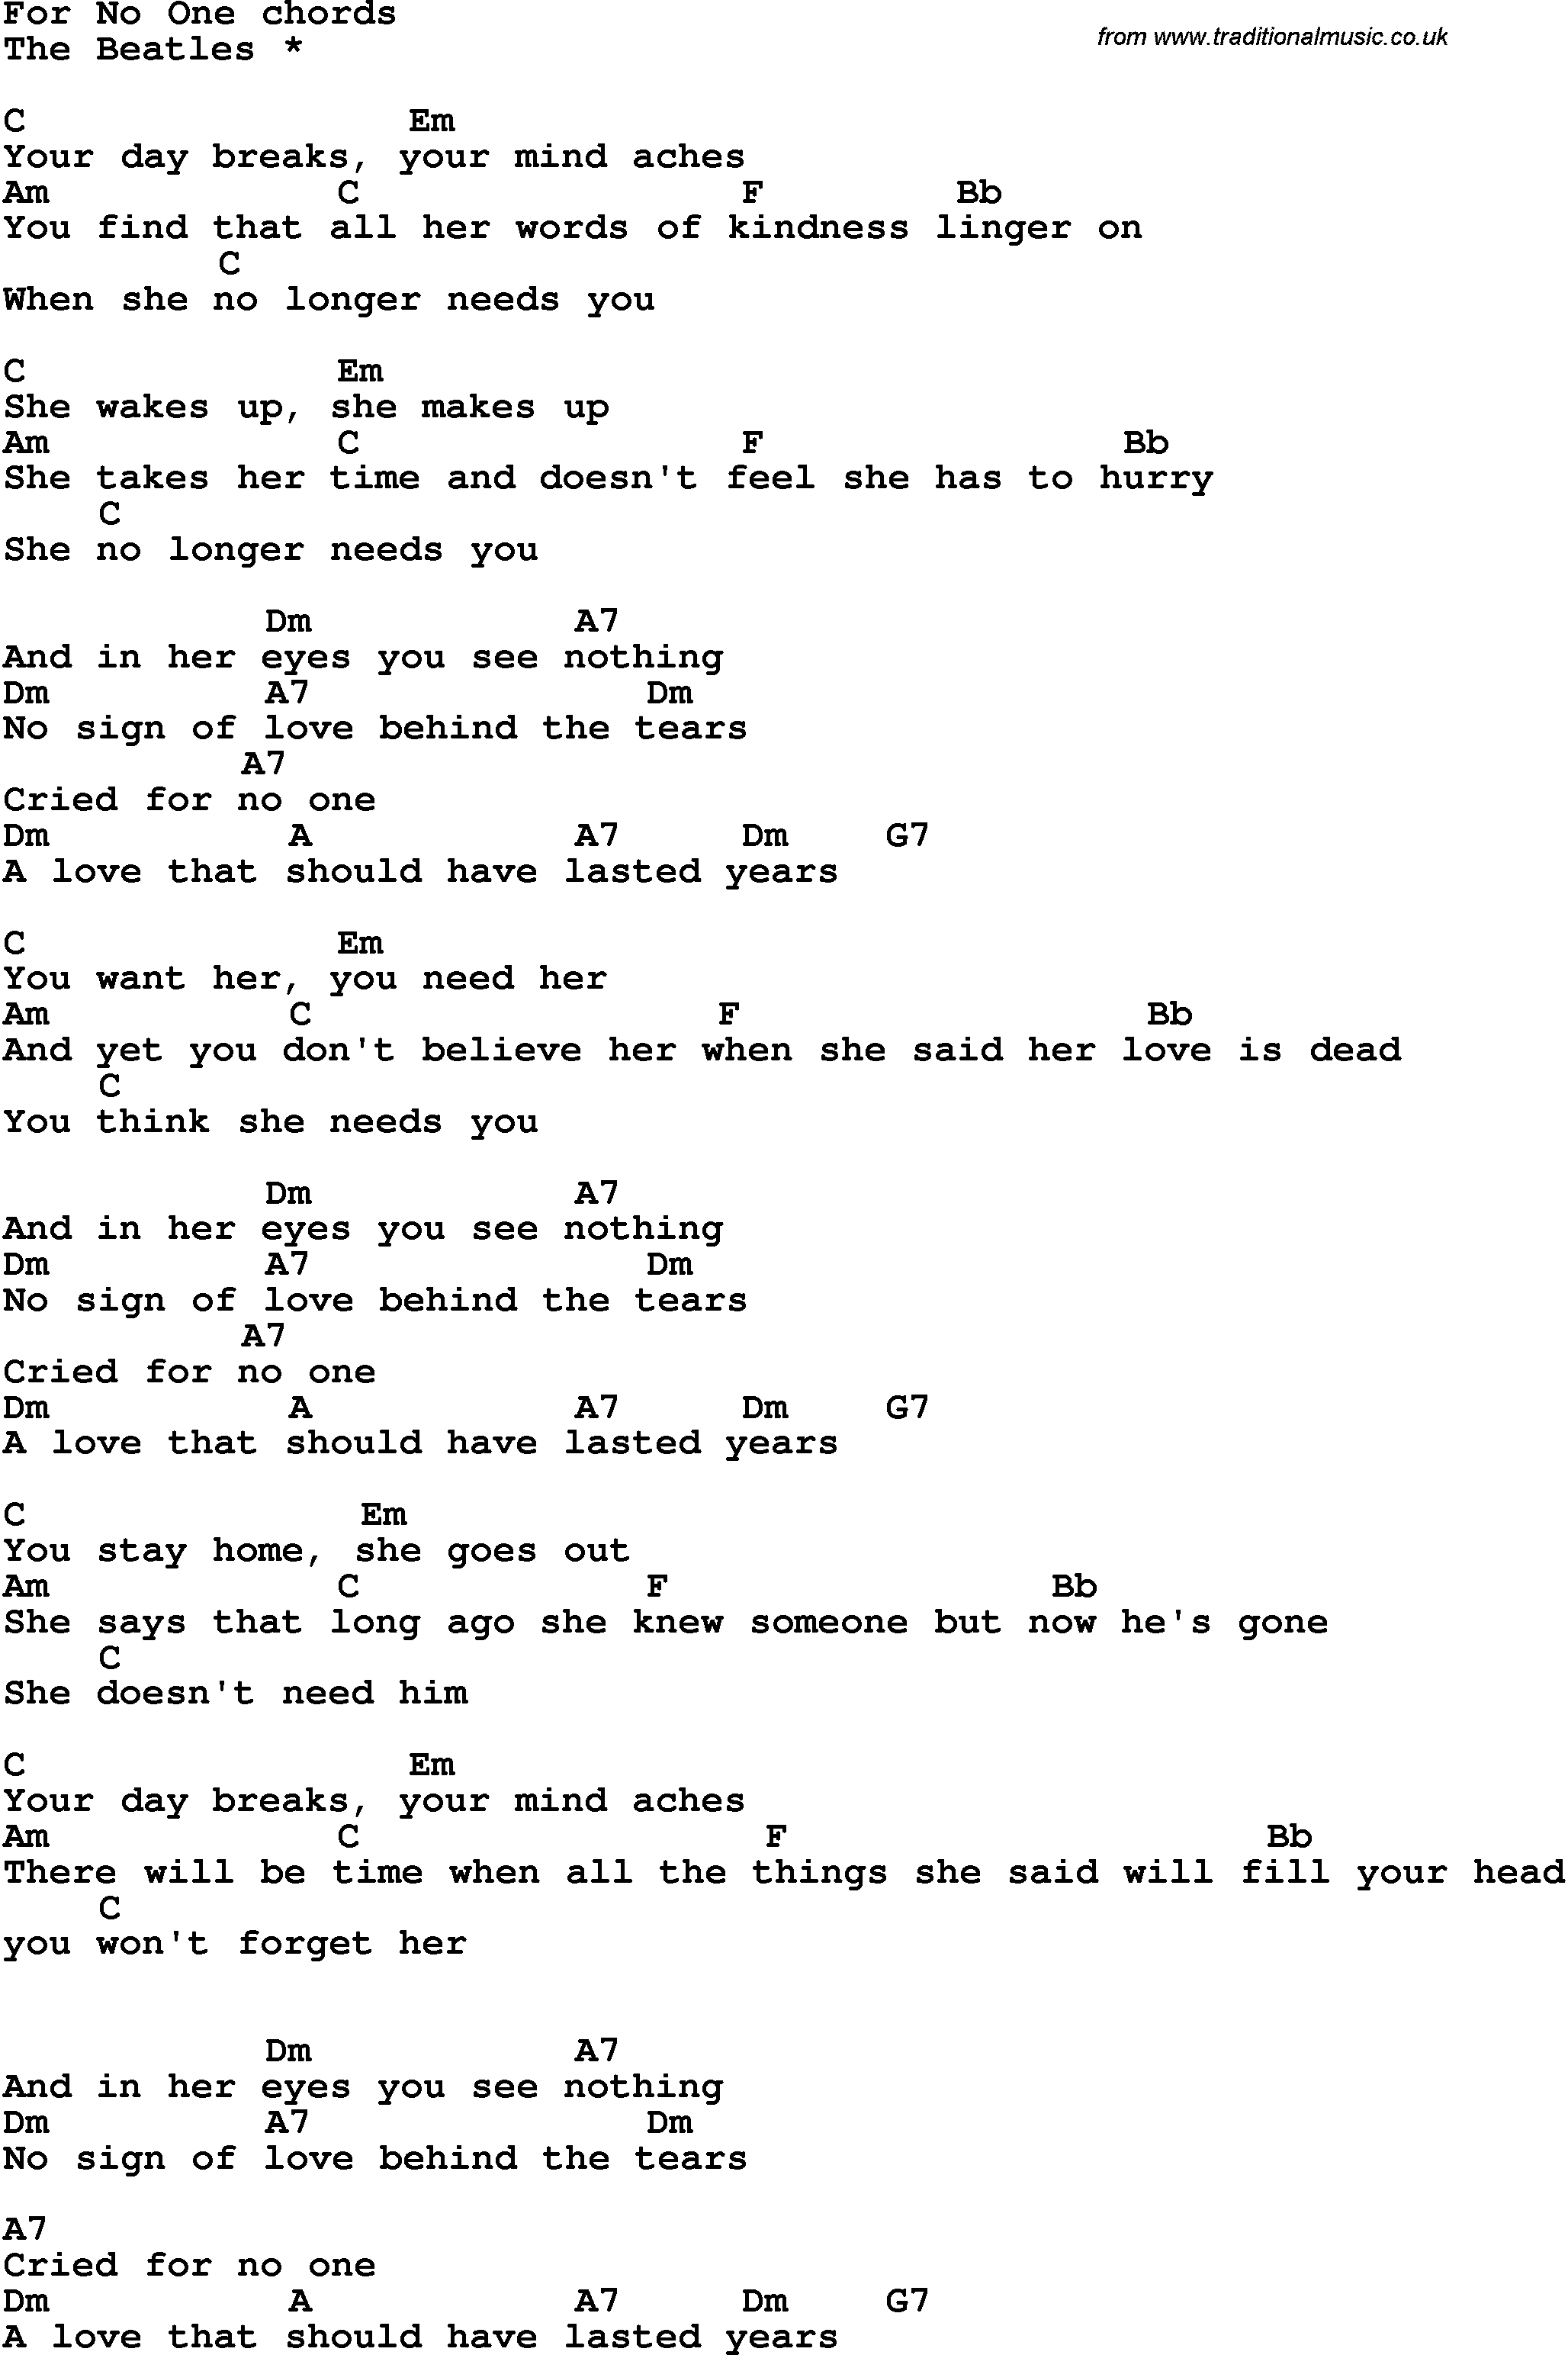 Song Lyrics with guitar chords for For No One - The Beatles